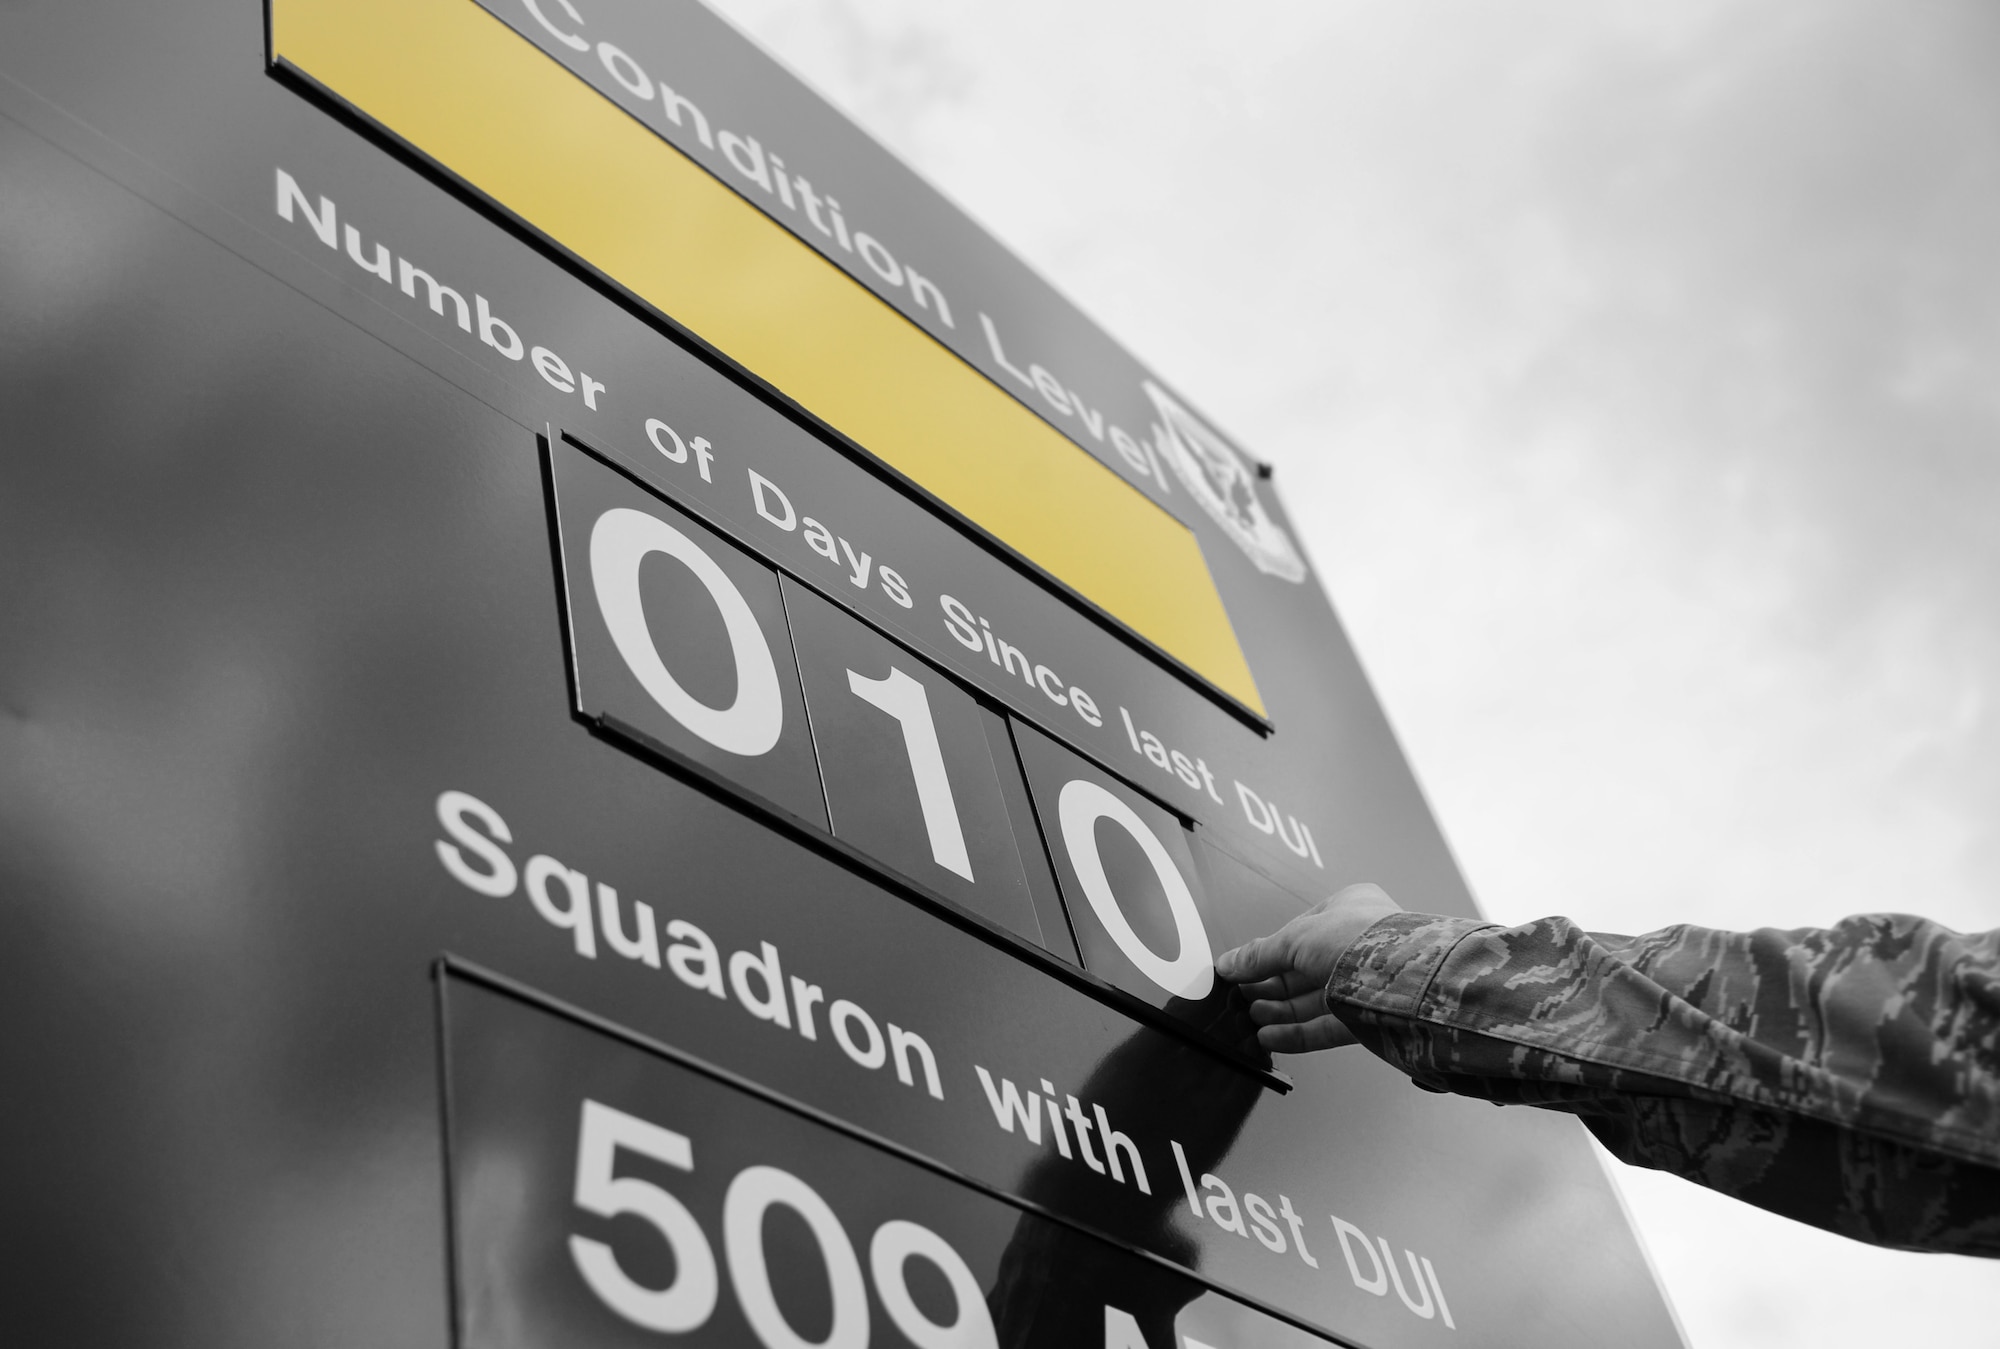 An Airman changes the number of days since the last DUI on the DUI condition level sign at Whiteman Air Force Base, Mo., July 13, 2016. In an attempt to further prevent Airmen from getting behind the wheel while intoxicated, the 509th Bomb Wing implemented a DUI Battle Plan. The plan serves as a tool for commanders and supervisors to ensure Airmen and members of Team Whiteman understand the risks of drunken driving and the importance of responsible decision making with regard to their safety and the safety of others on the road. (U.S. Air Force photo by Senior Airman Joel Pfiester)